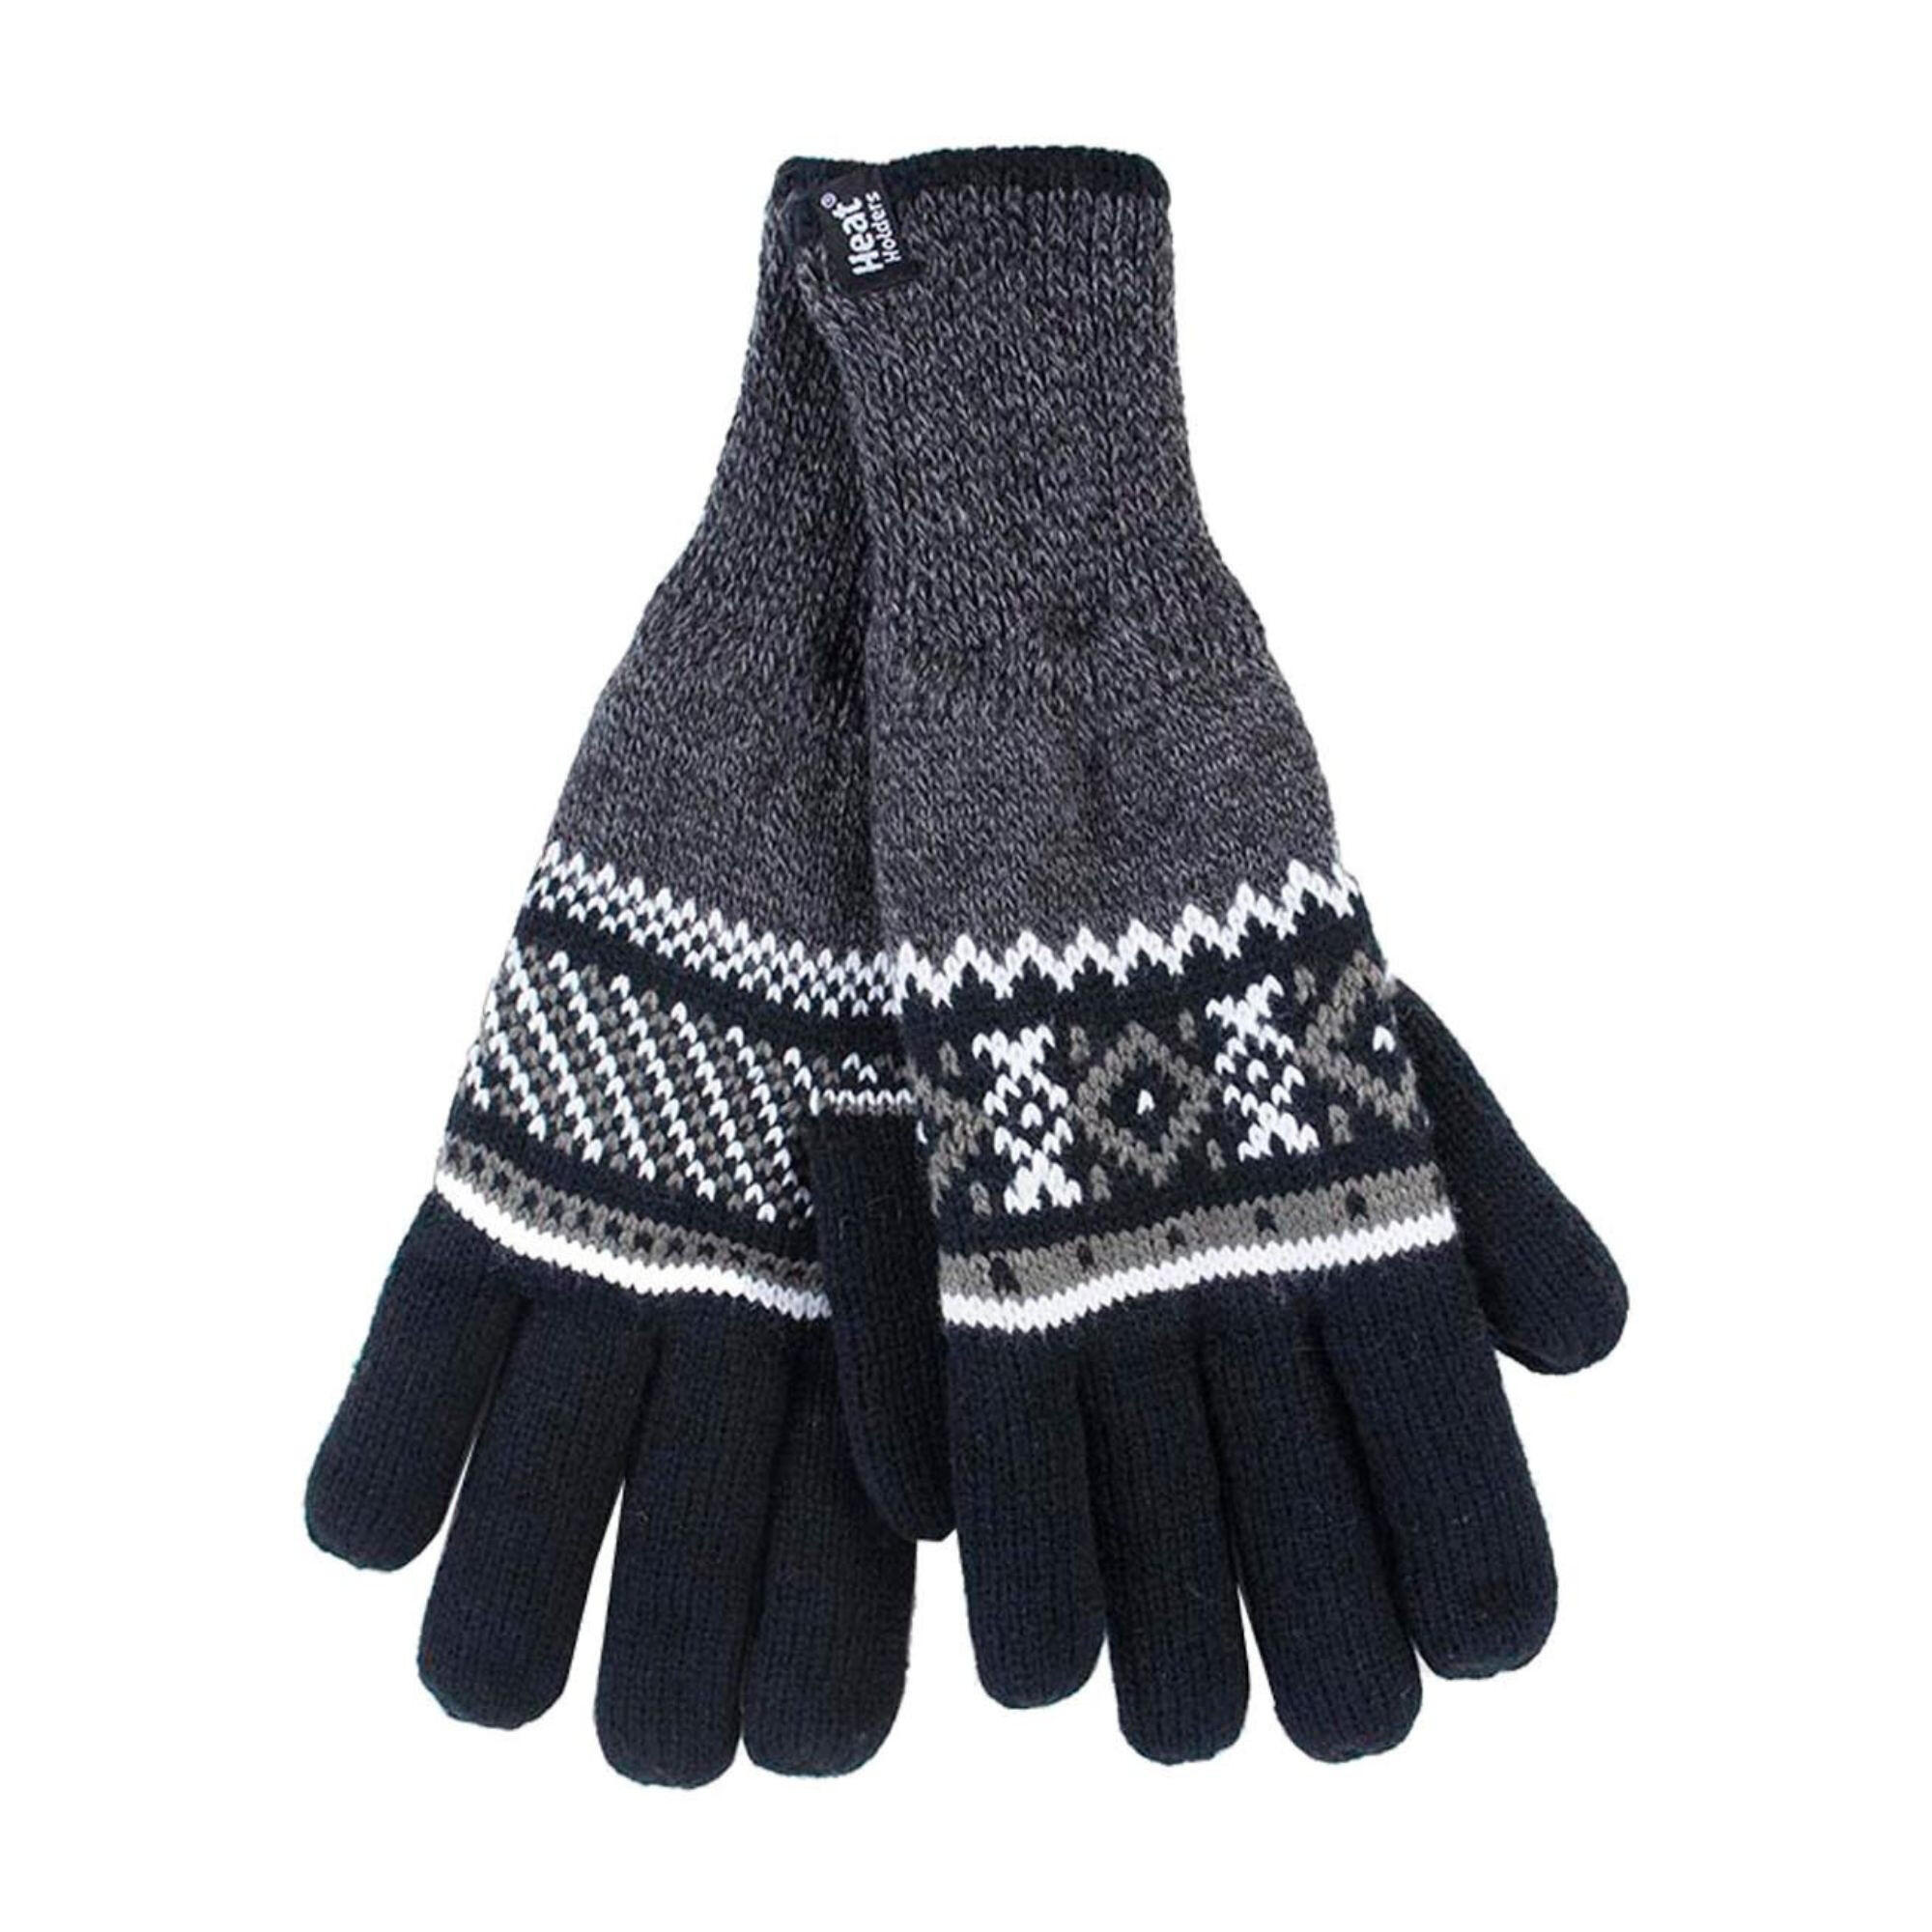 Mens Nordic Fairisle Knitted Fleece Lined Winter Thermal Gloves 1/4